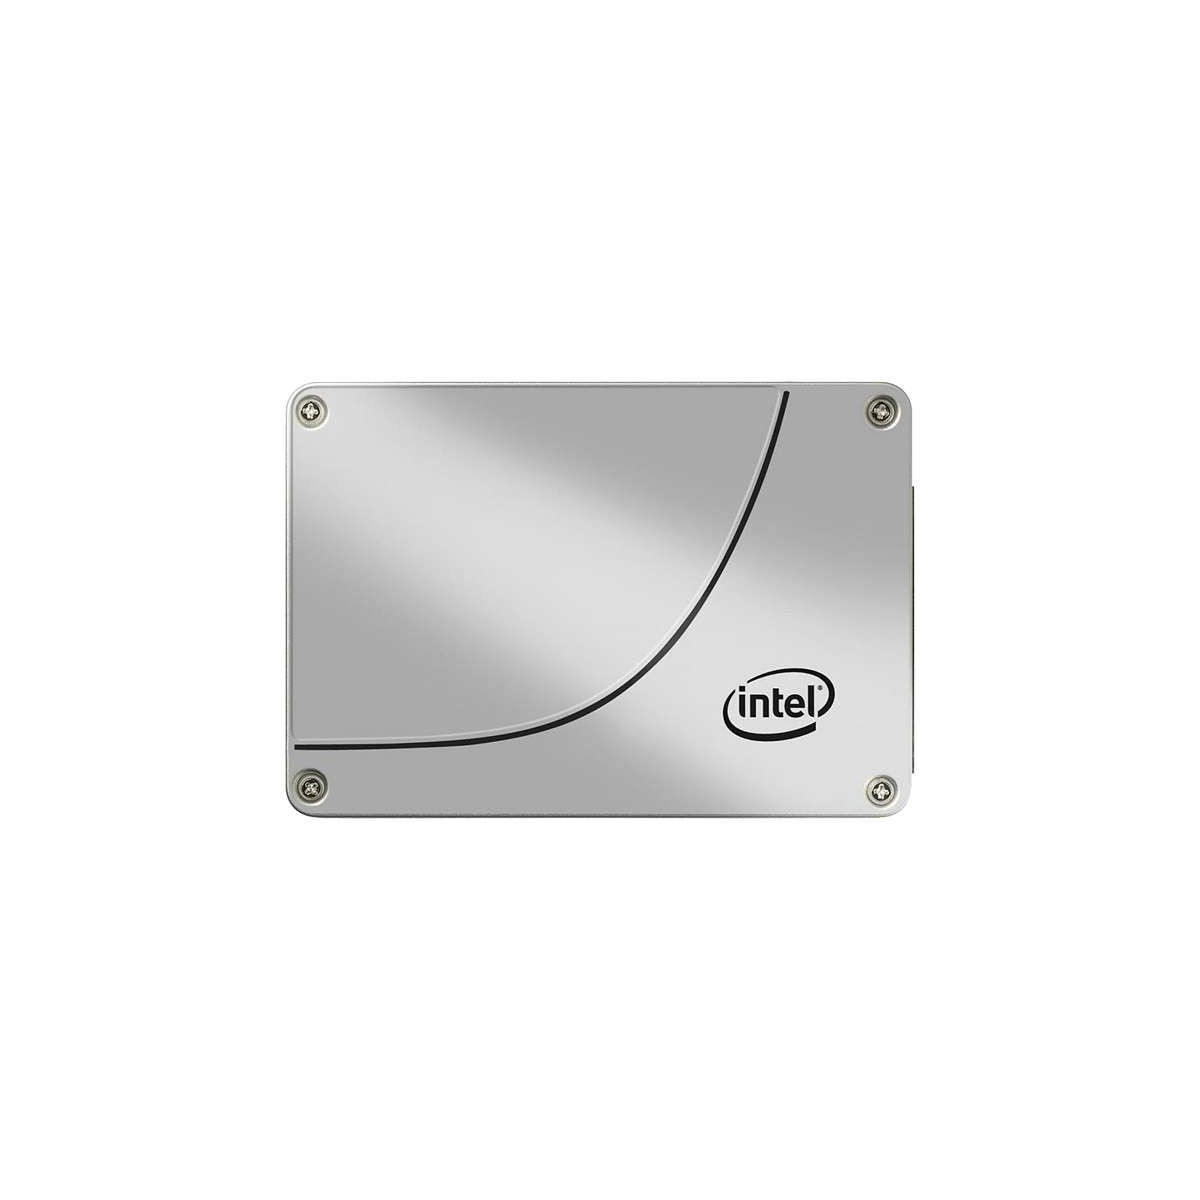 Intel Solid-State Drive DC S3610 Series 2.5 SATA 1,600 GB - Solid State Disk - Internal